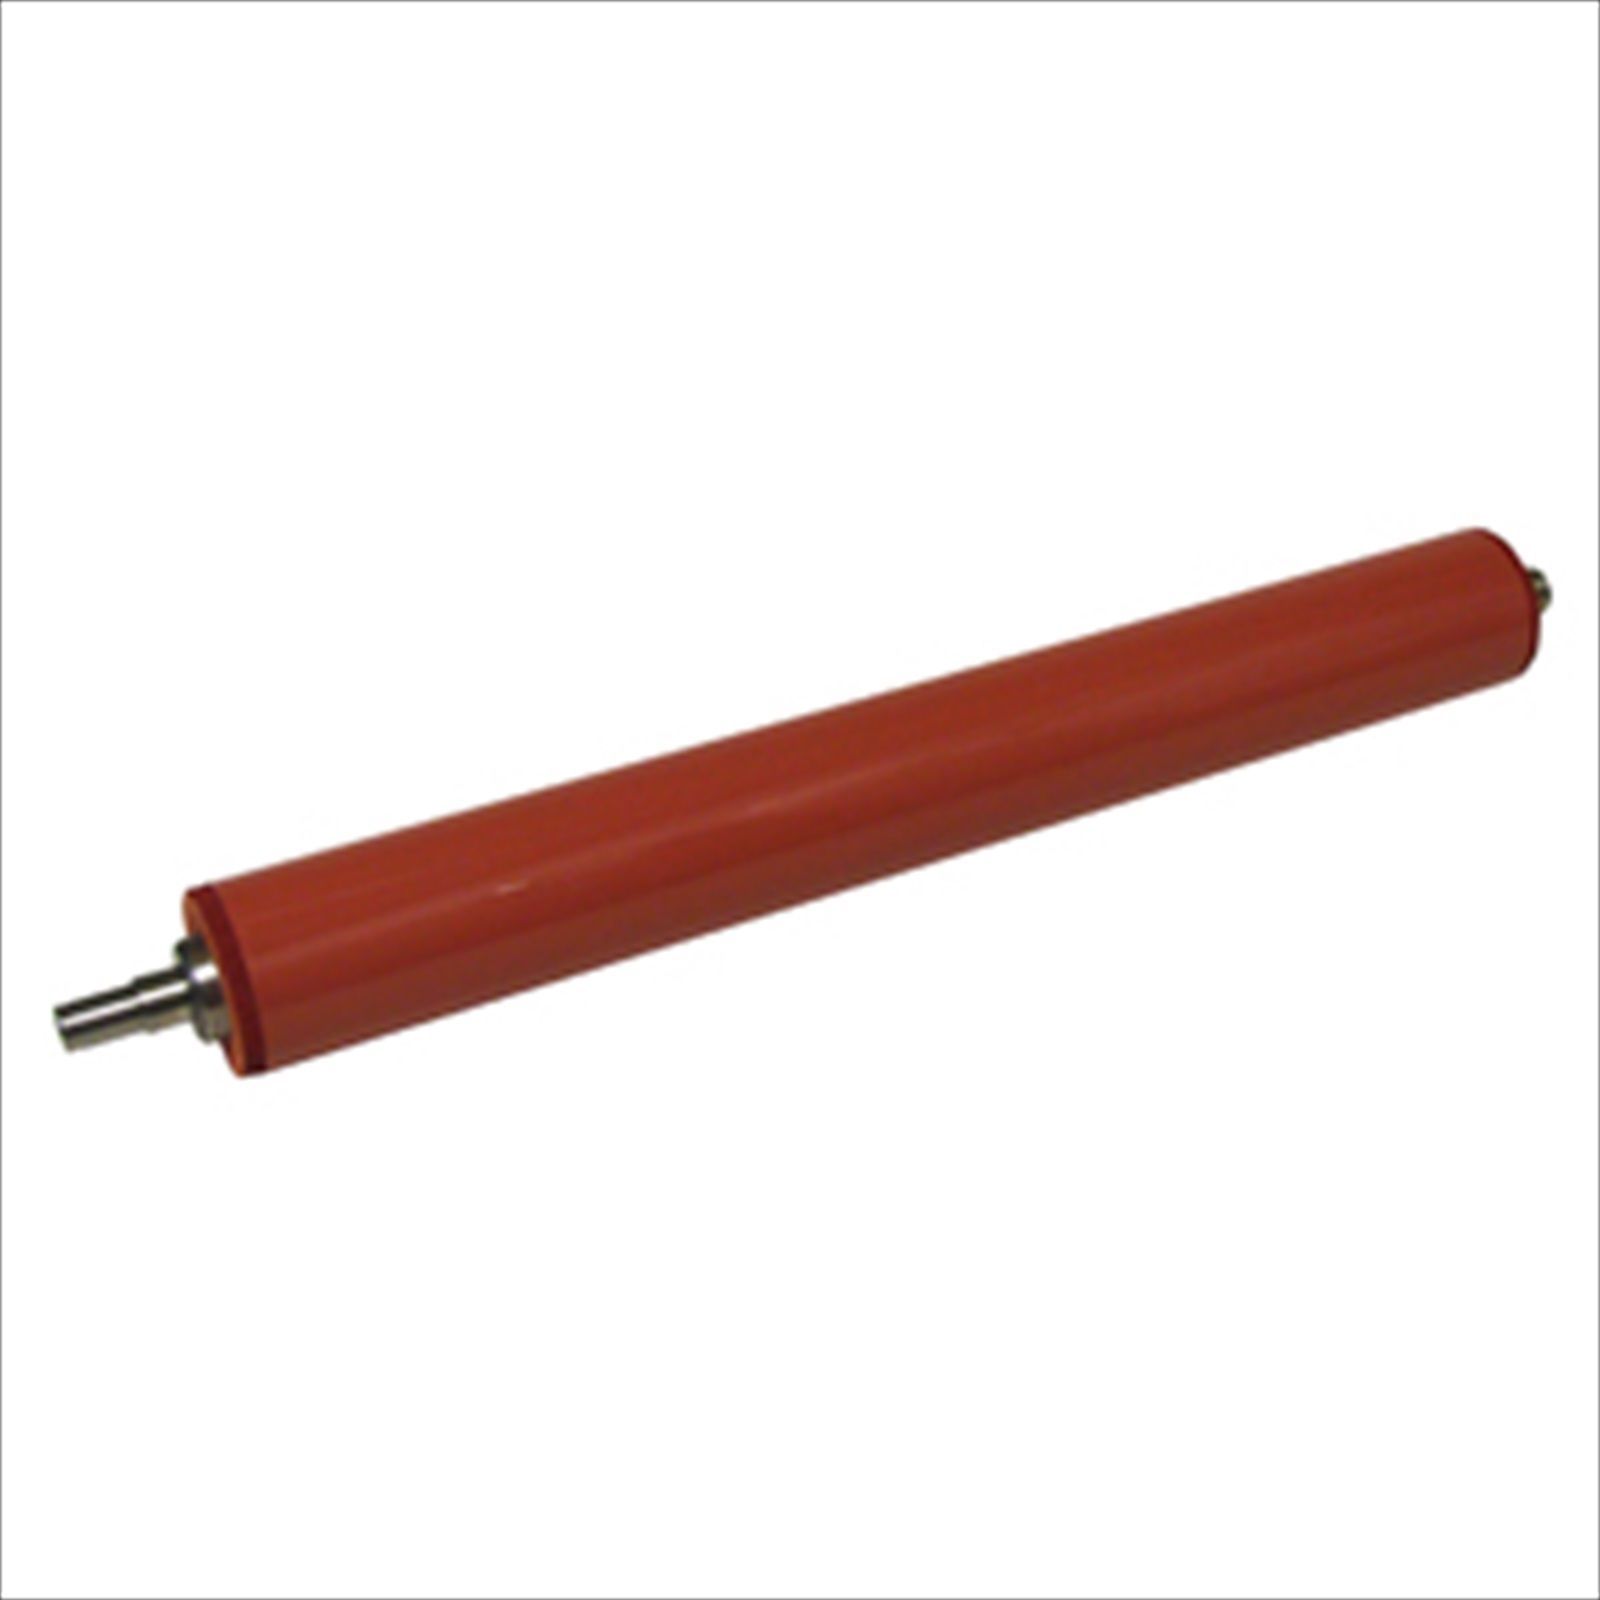 Primary image for RICOH HEATING ROLLER,UPPER FUSER,AE010088,AE01-0088,MPC3001,MPC3501,LD630C,LD635